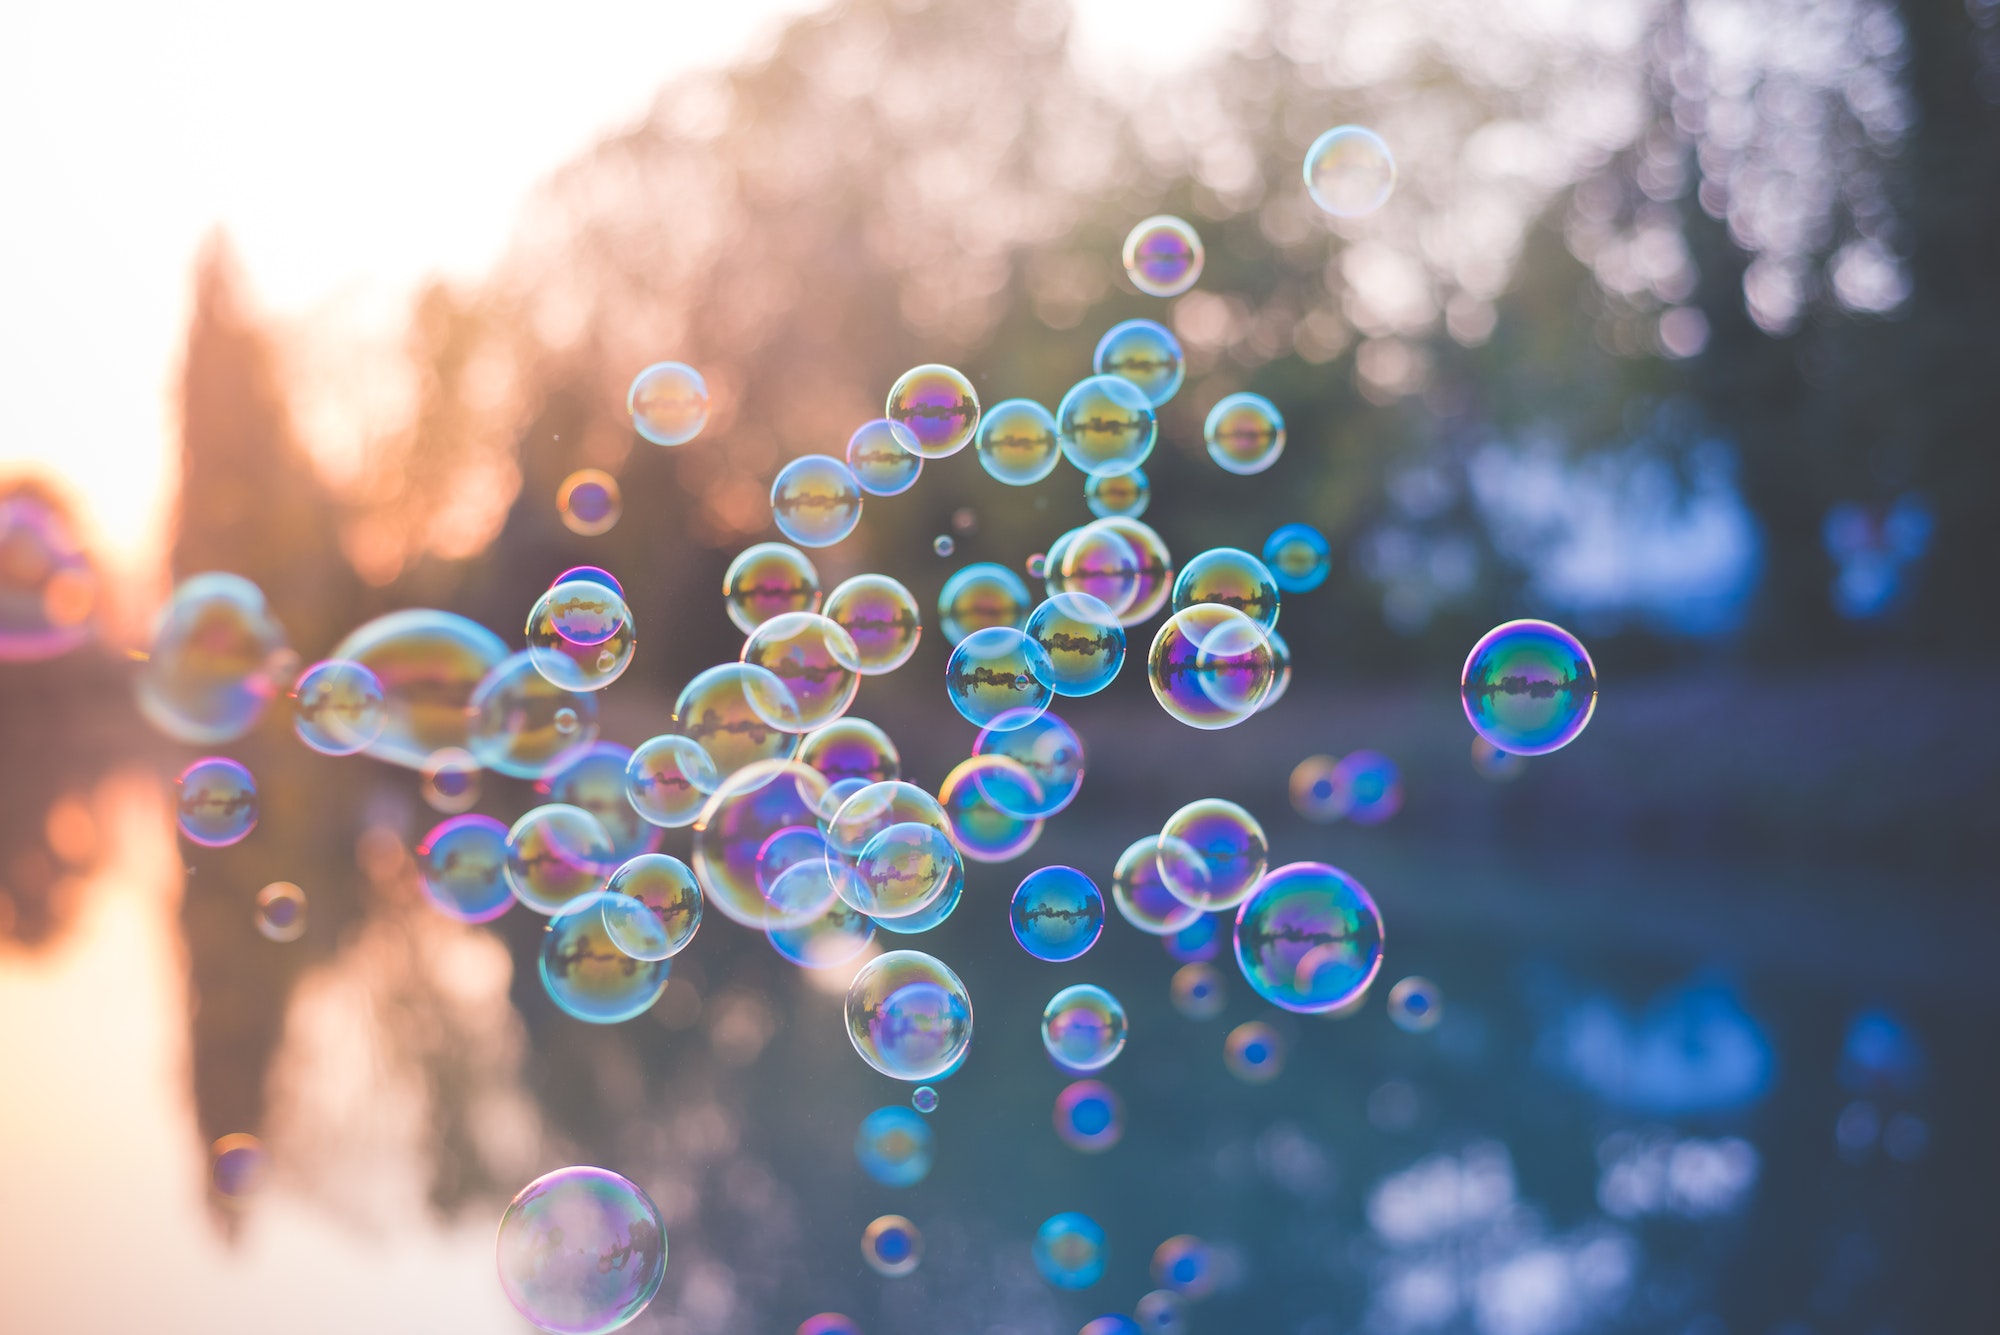 Bubbles floating